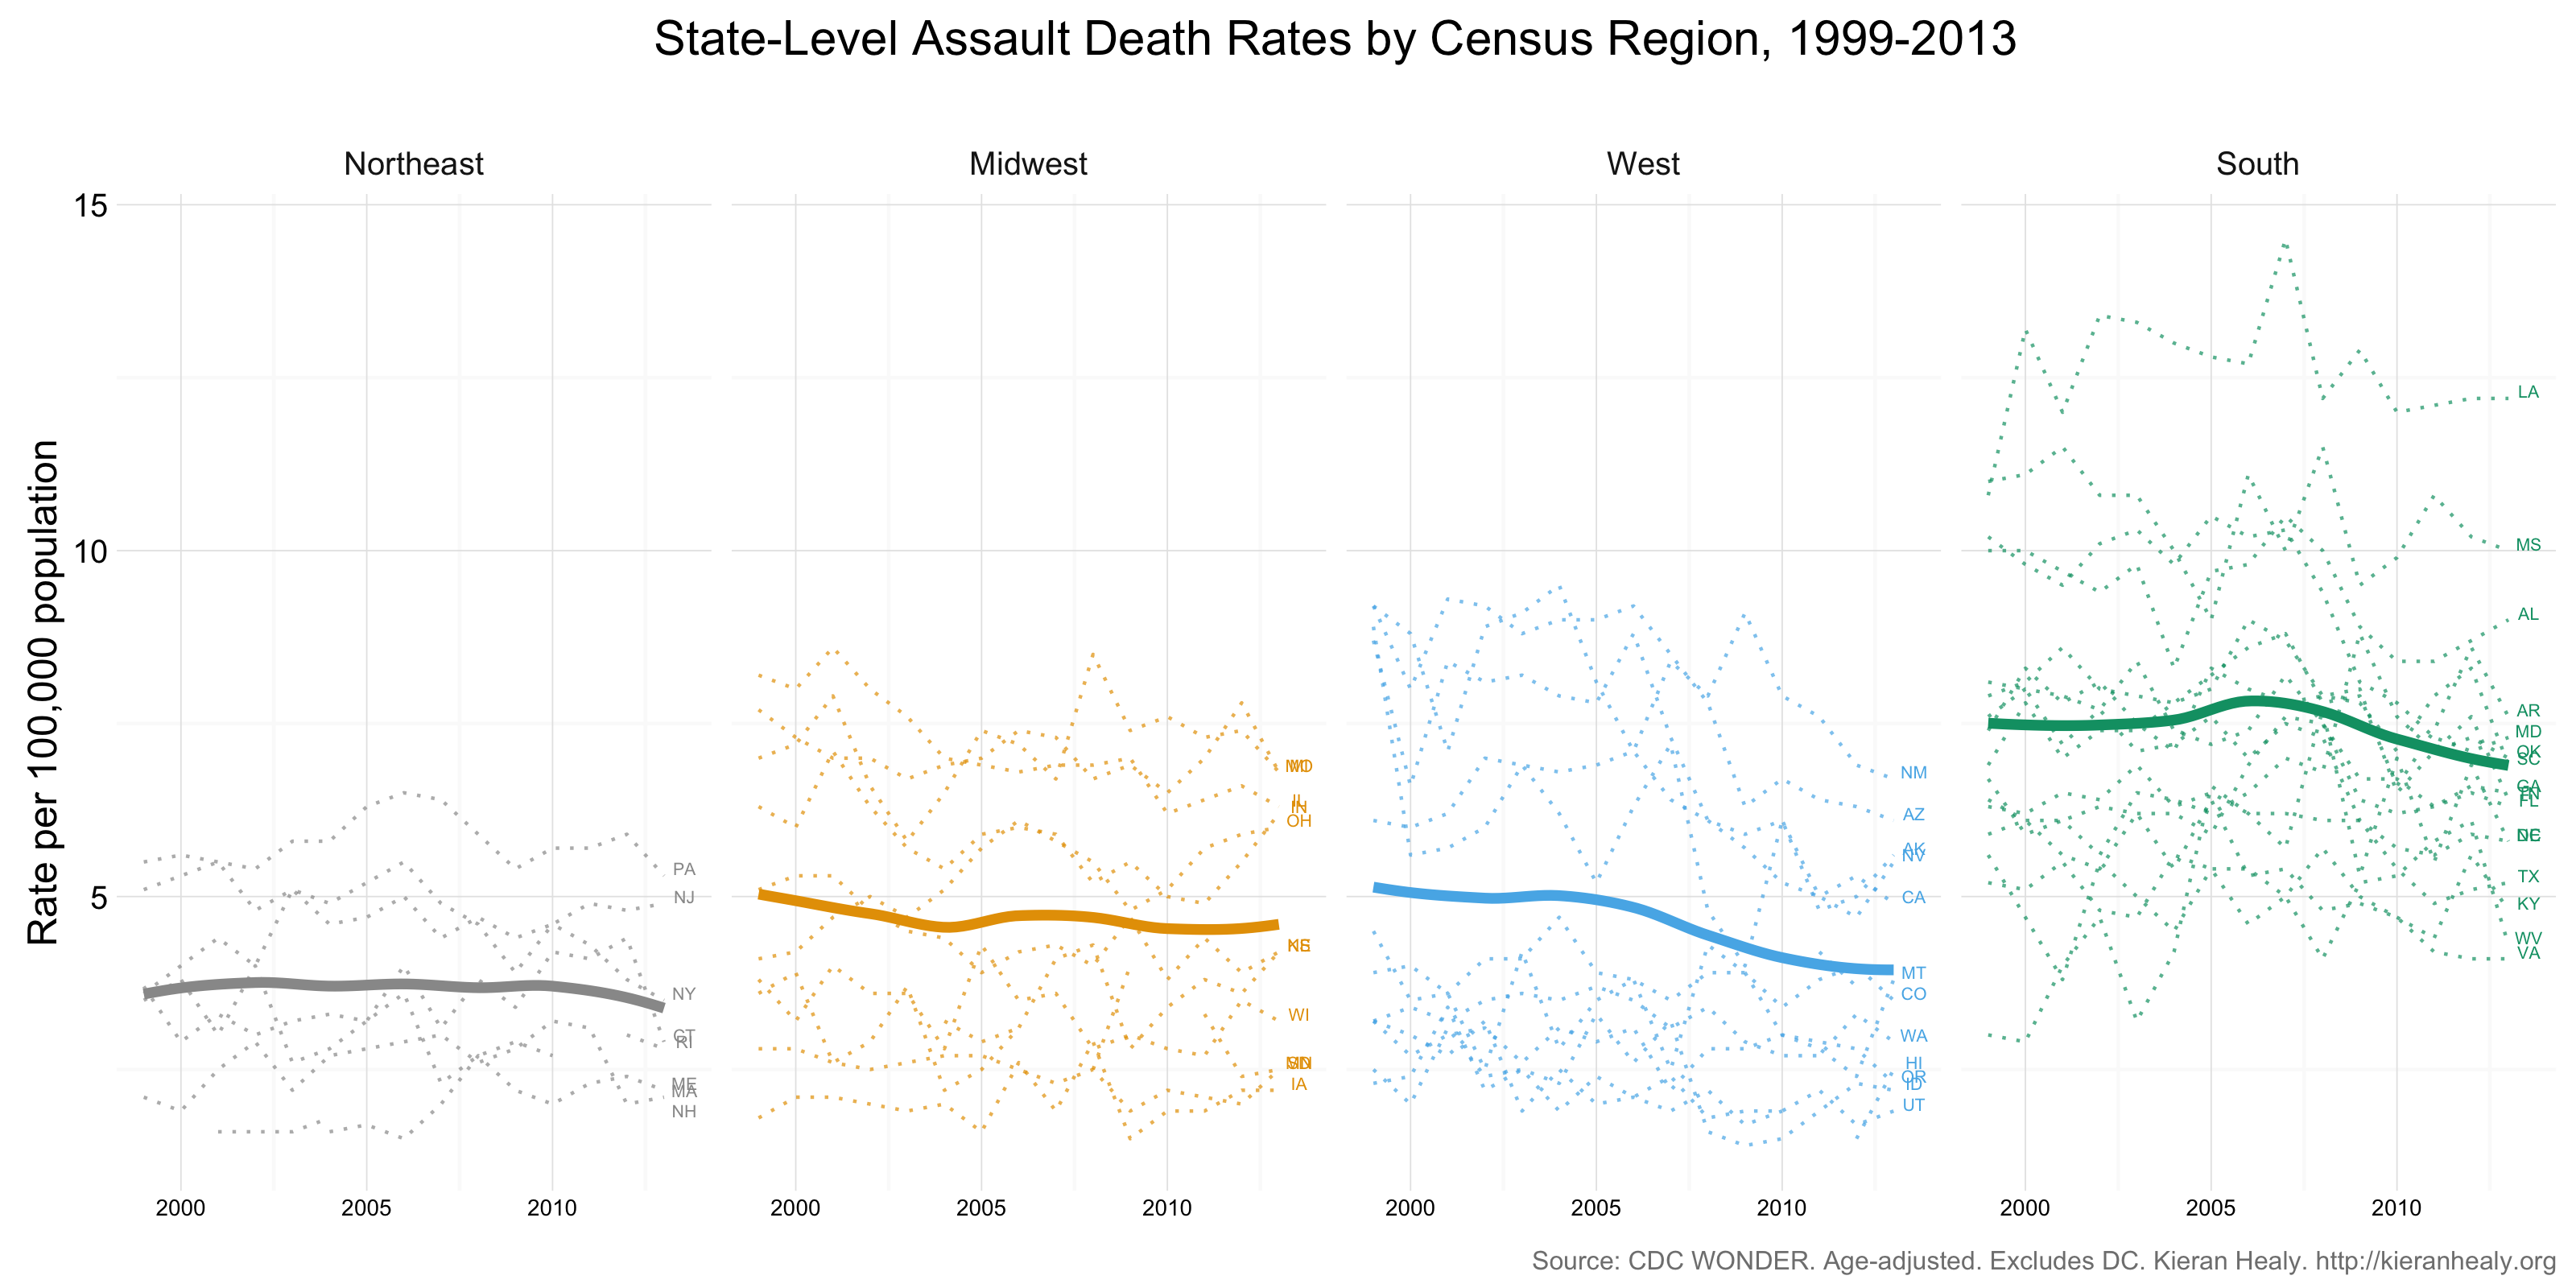 Assault death rates by region and state